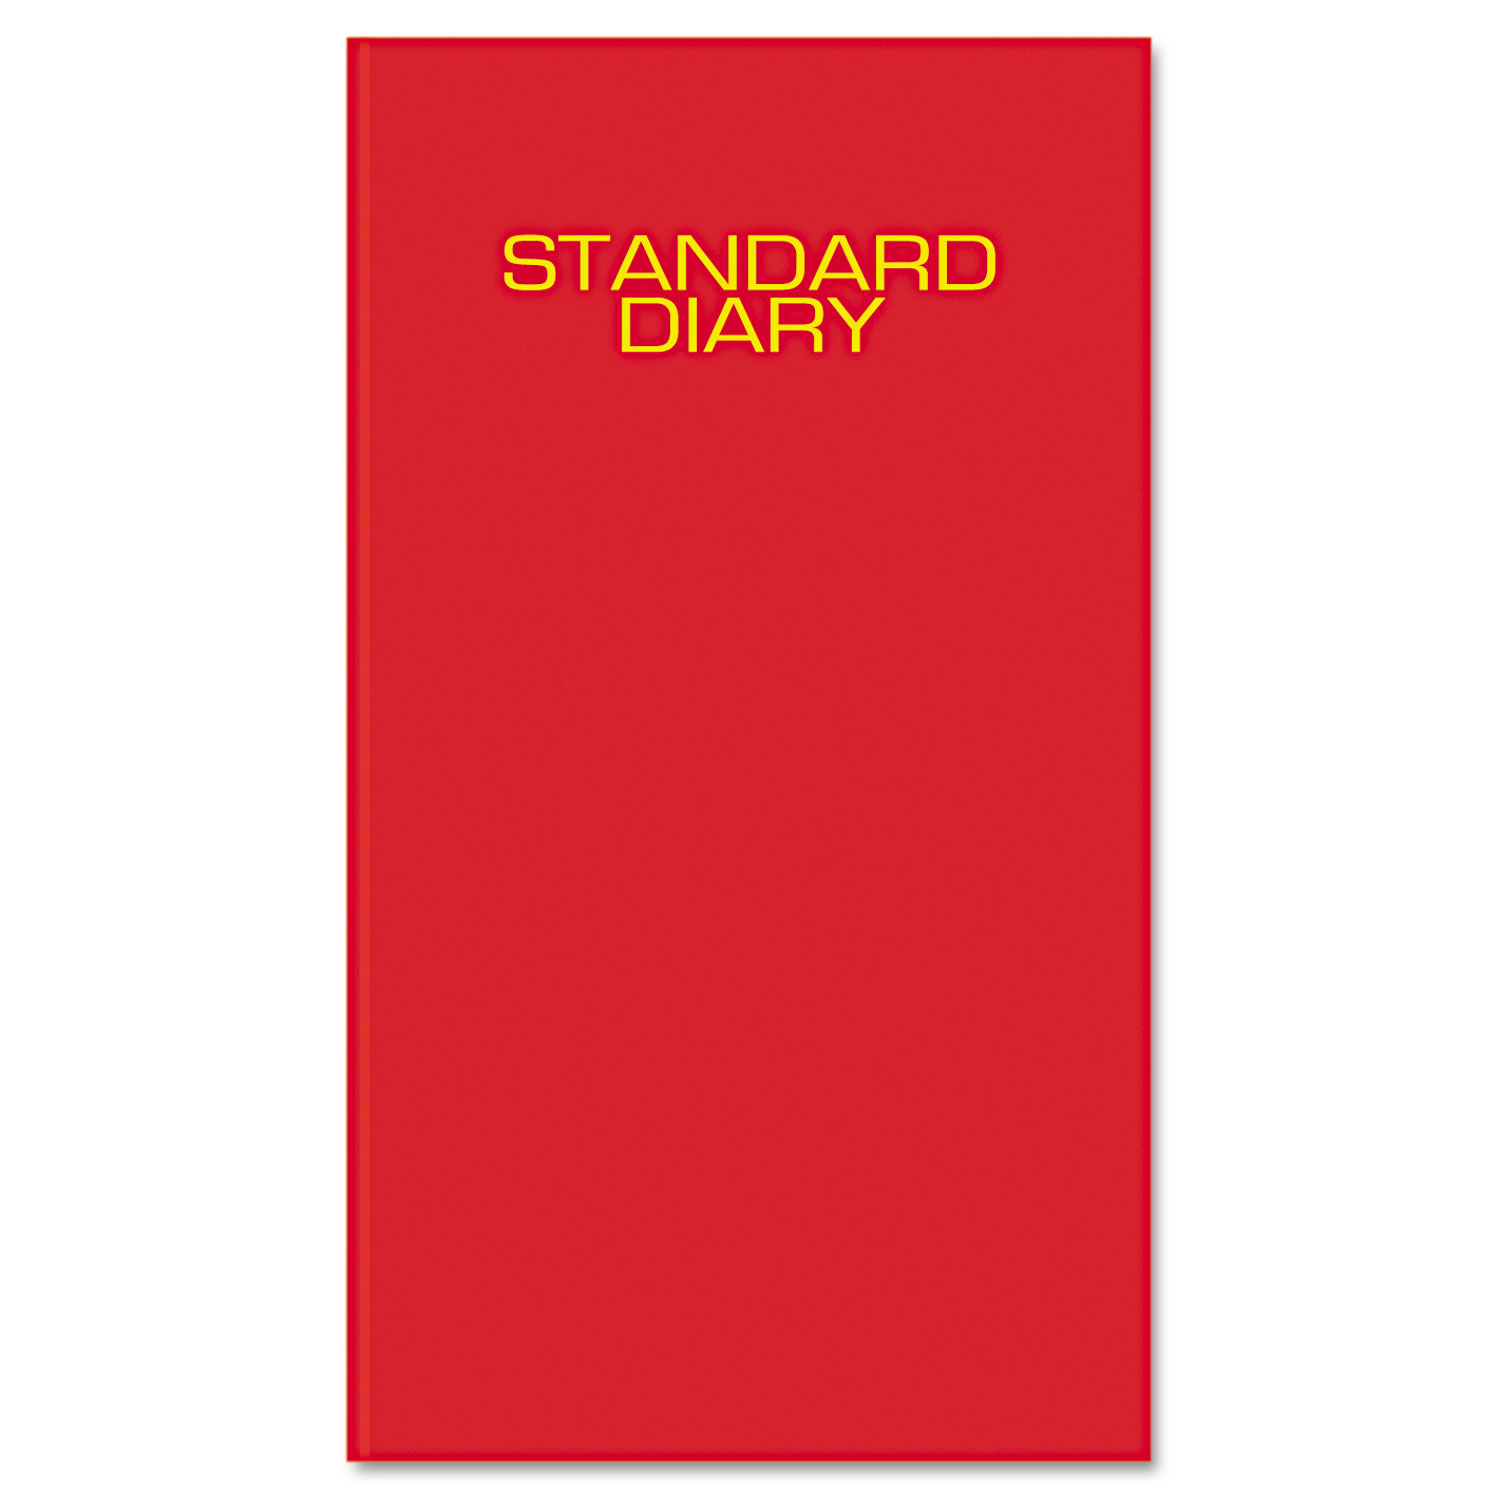 Standard Diary Daily Diary, Recycled, Red, 7 11/16 x 12 1/8, 2018